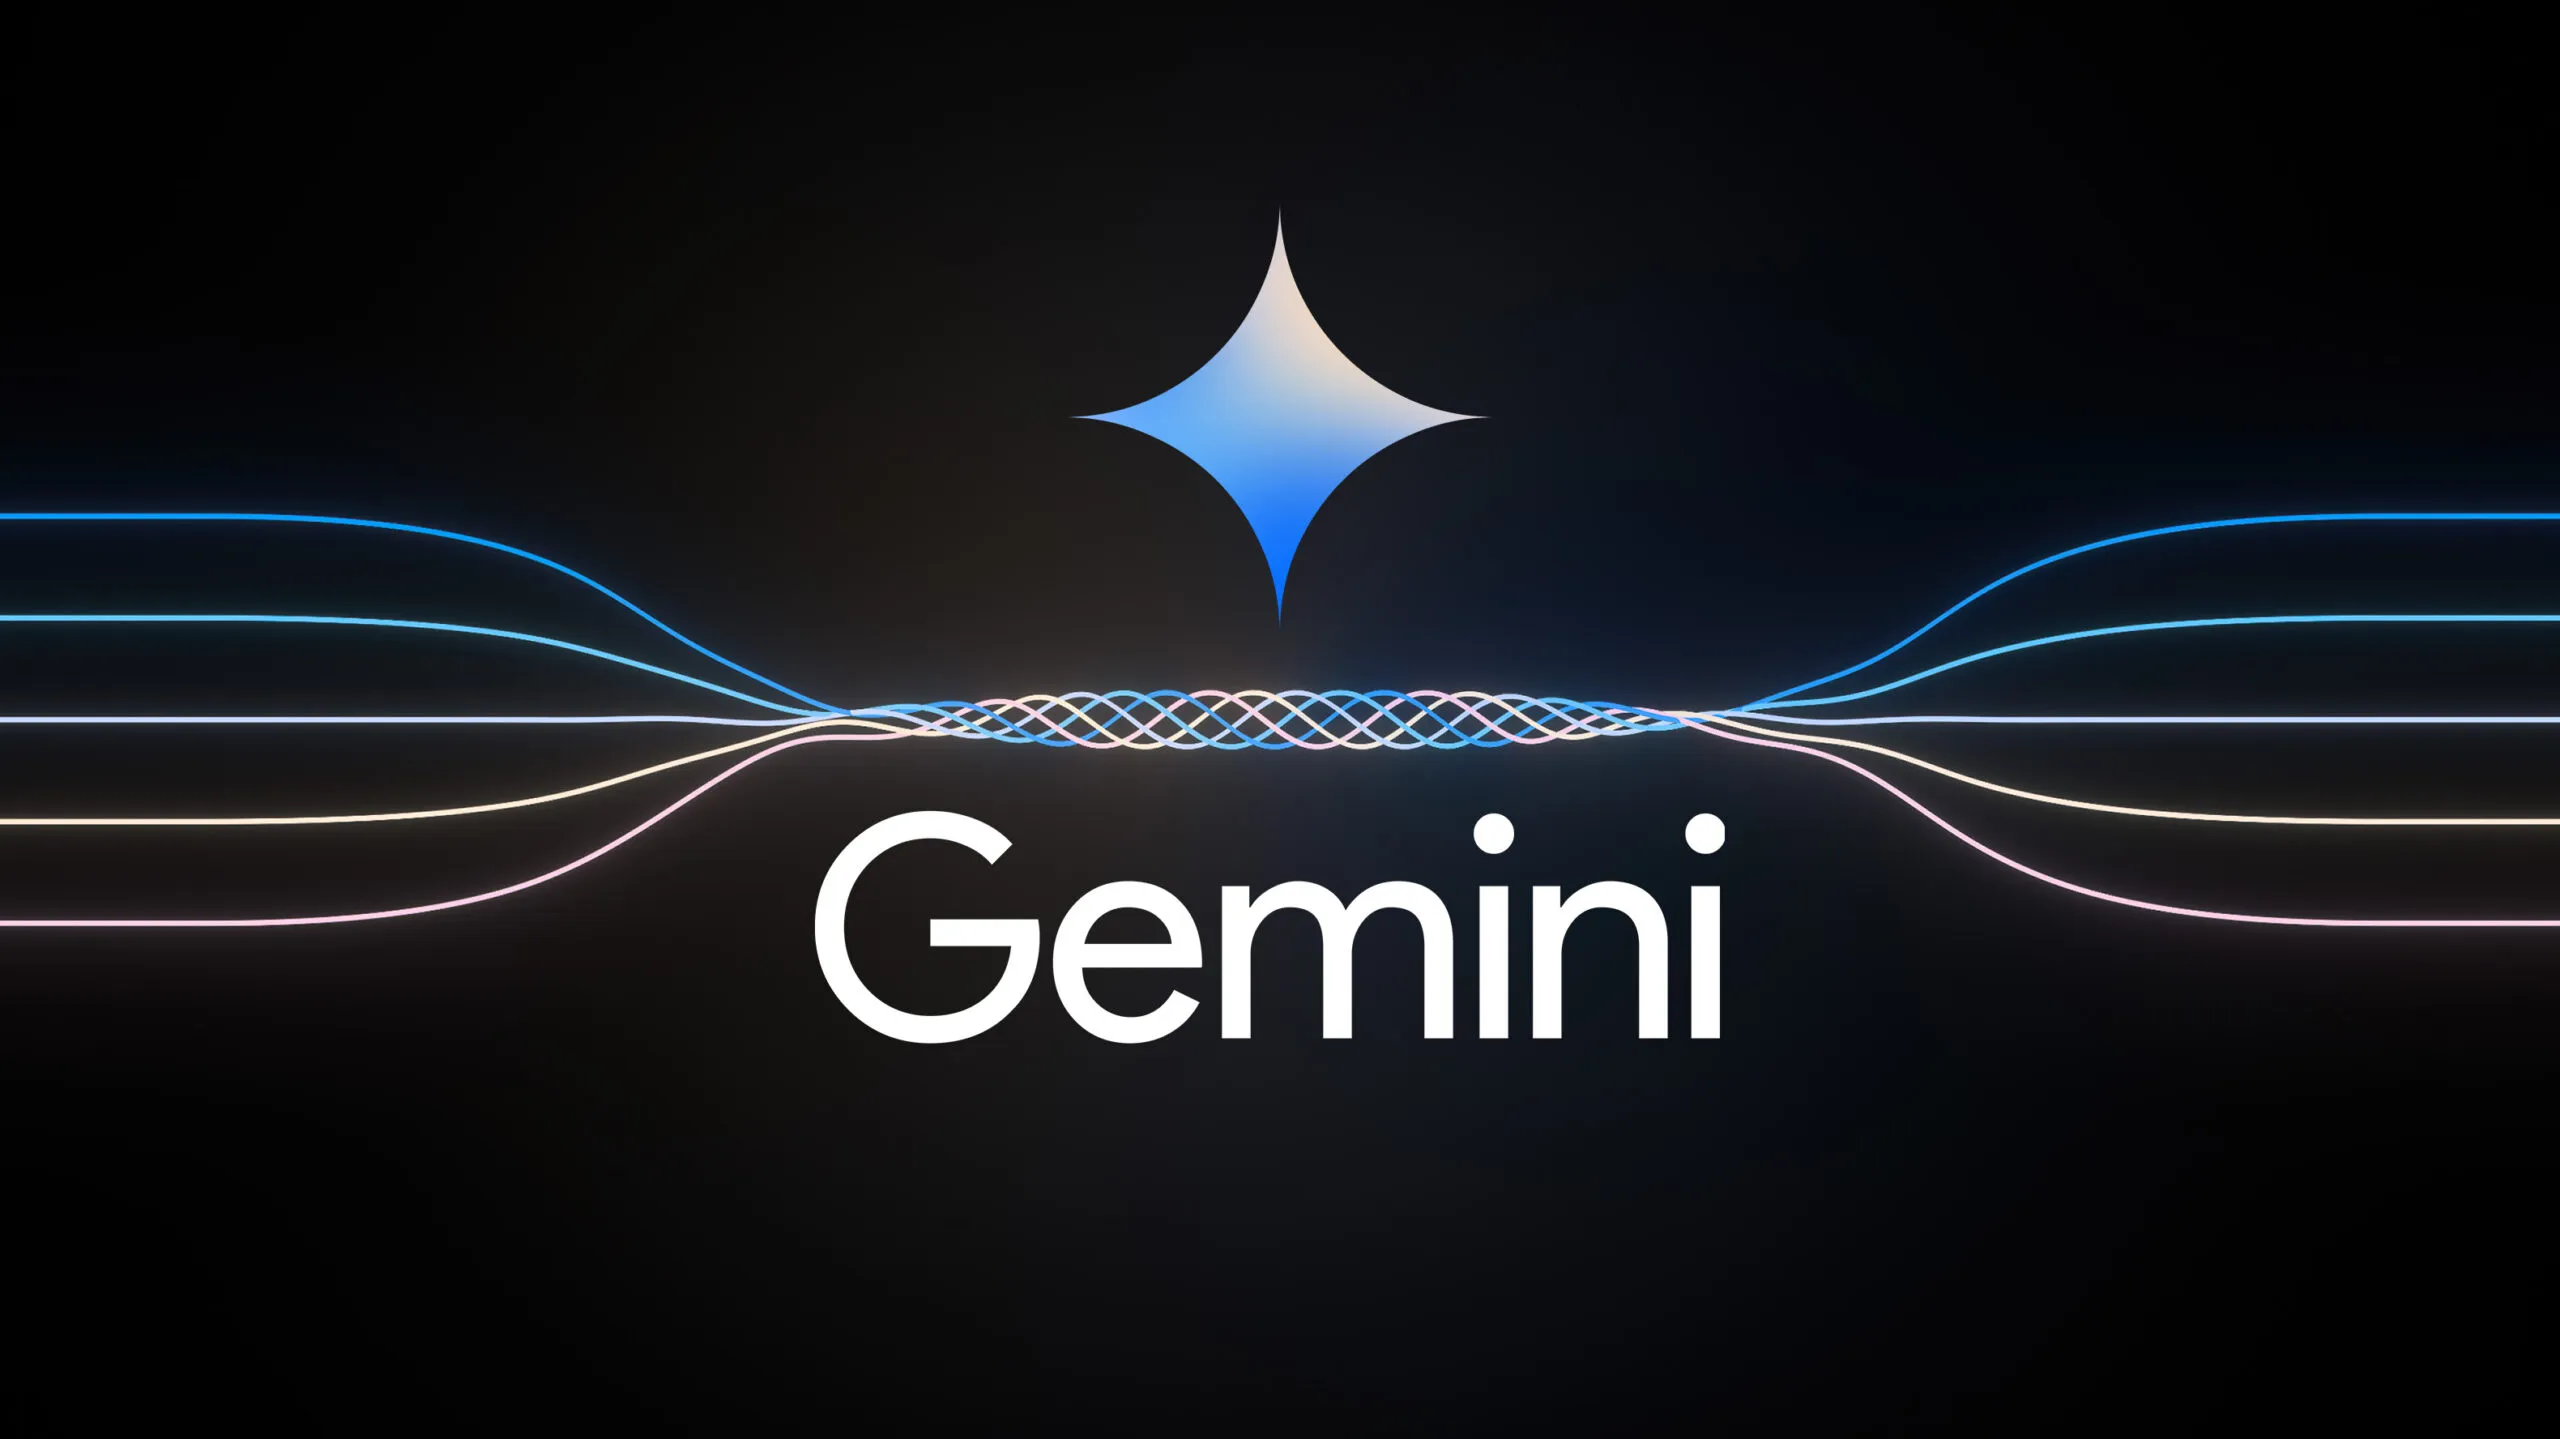 The Battle For First Place: A Look at Google's Gemini and its Competitors